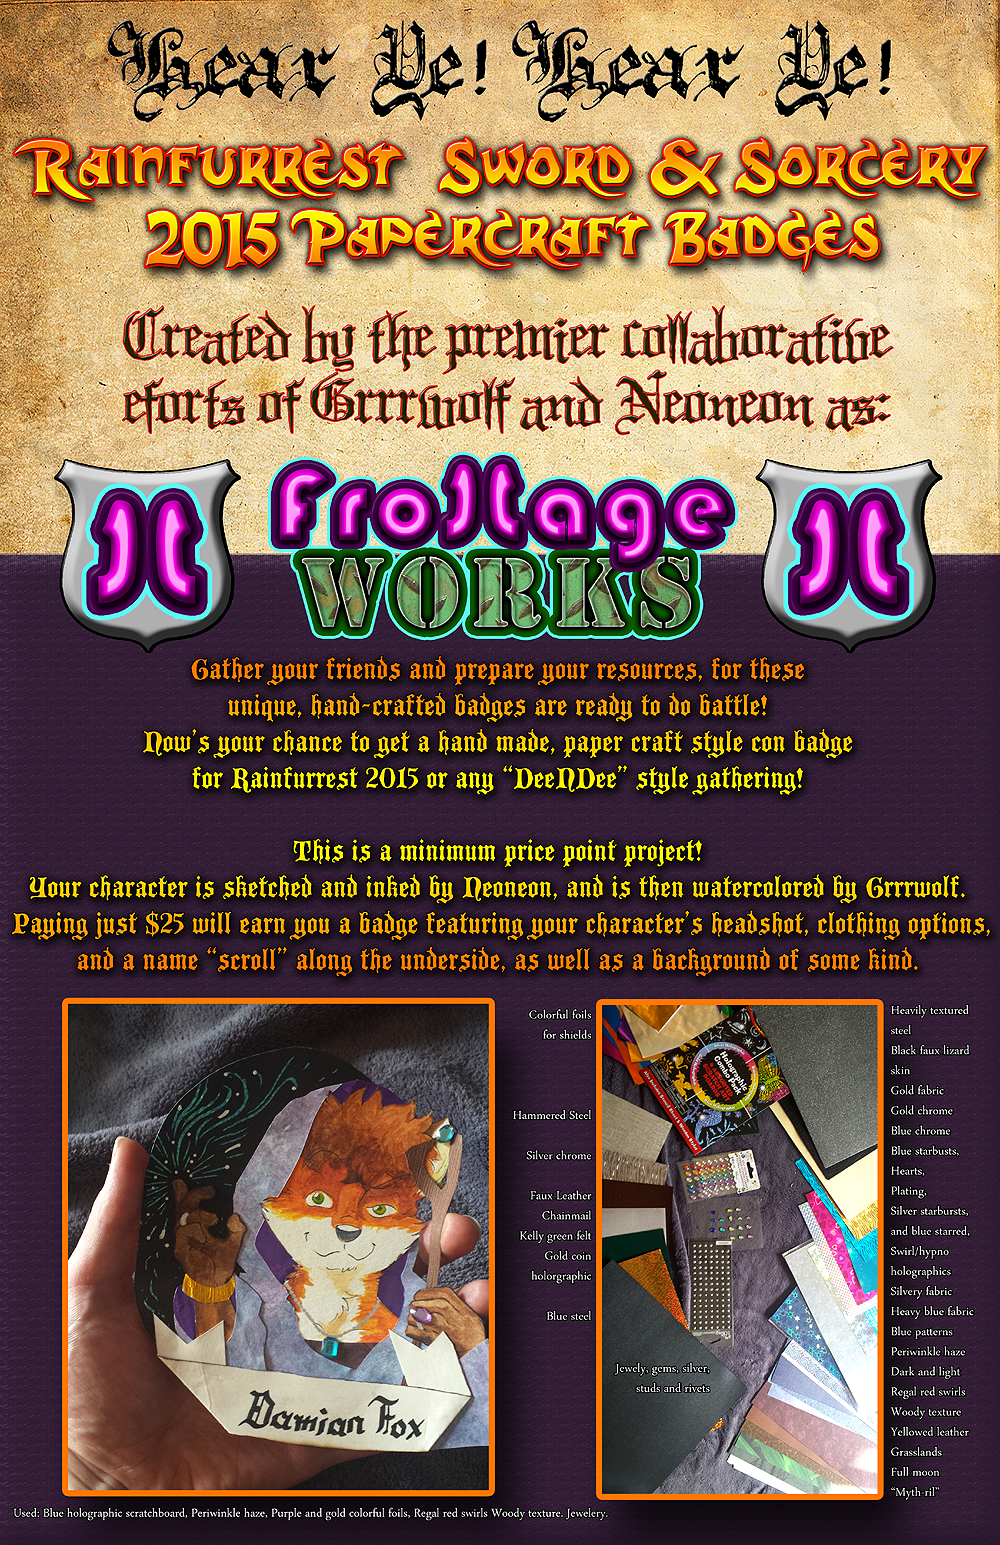 Most recent image: Frottage Works Name Badge Ad